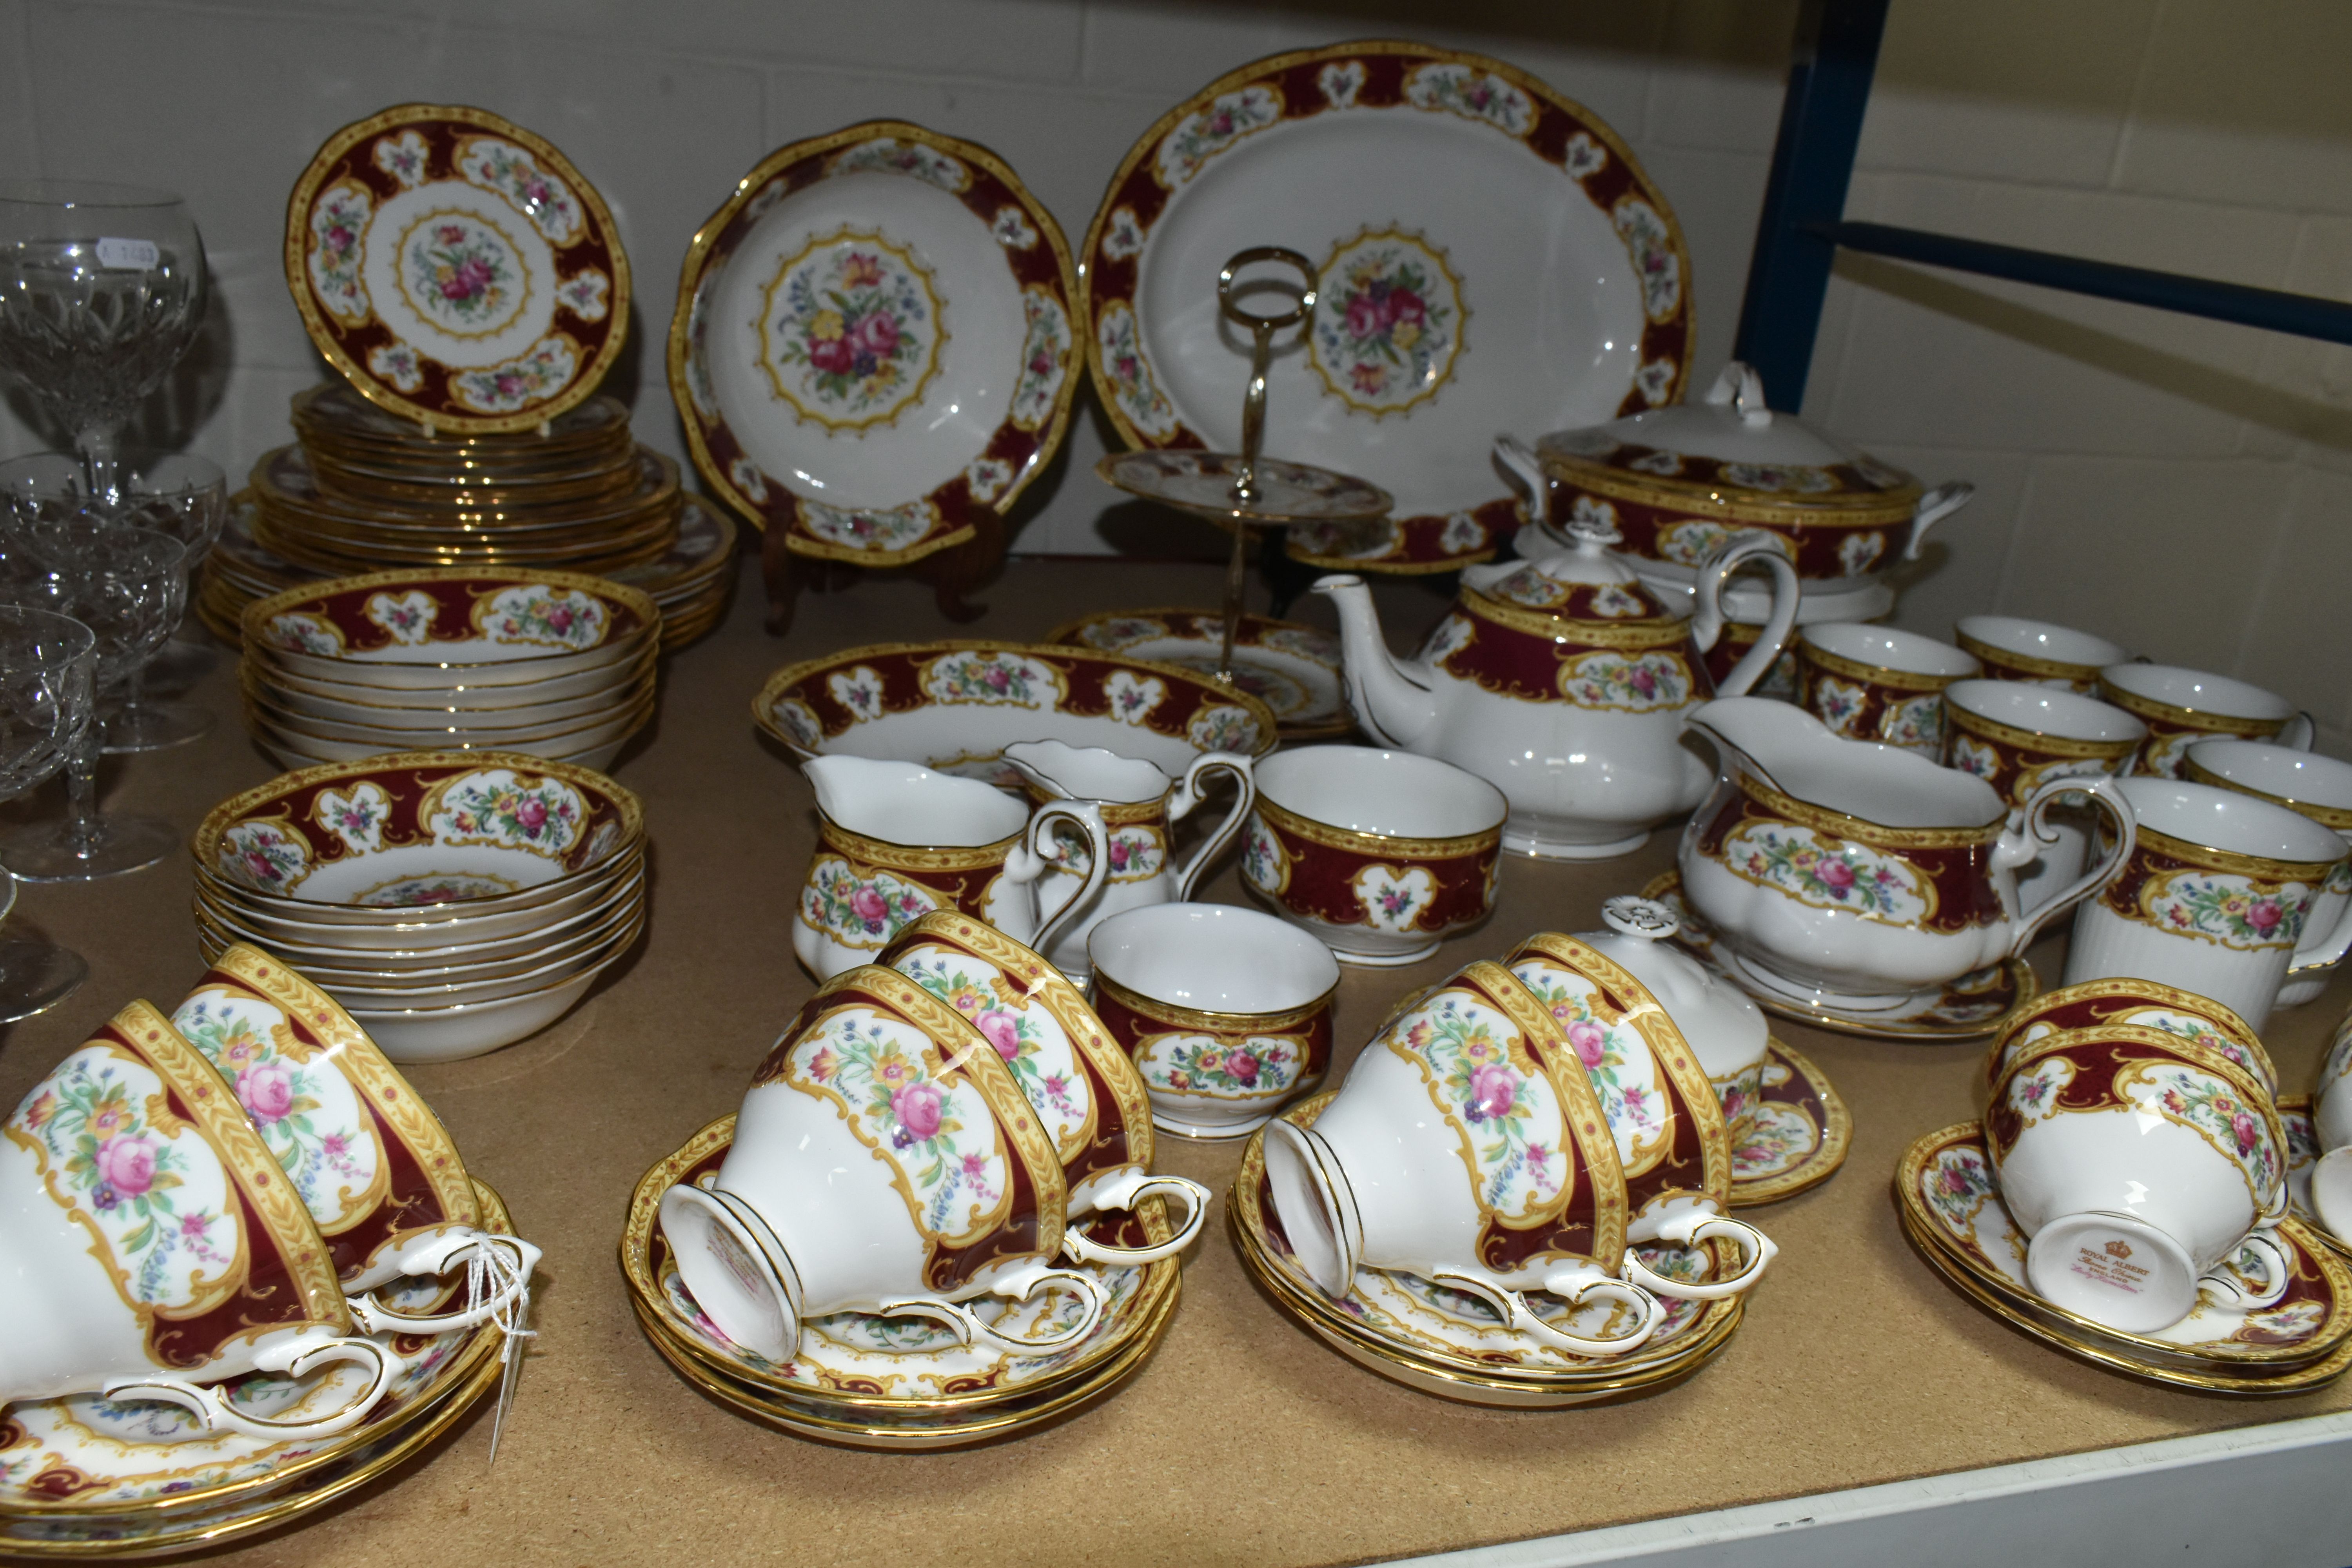 A SEVENTY EIGHT PIECE ROYAL ALBERT 'LADY HAMILTON' DINNER SERVICE, comprising a meat plate, two